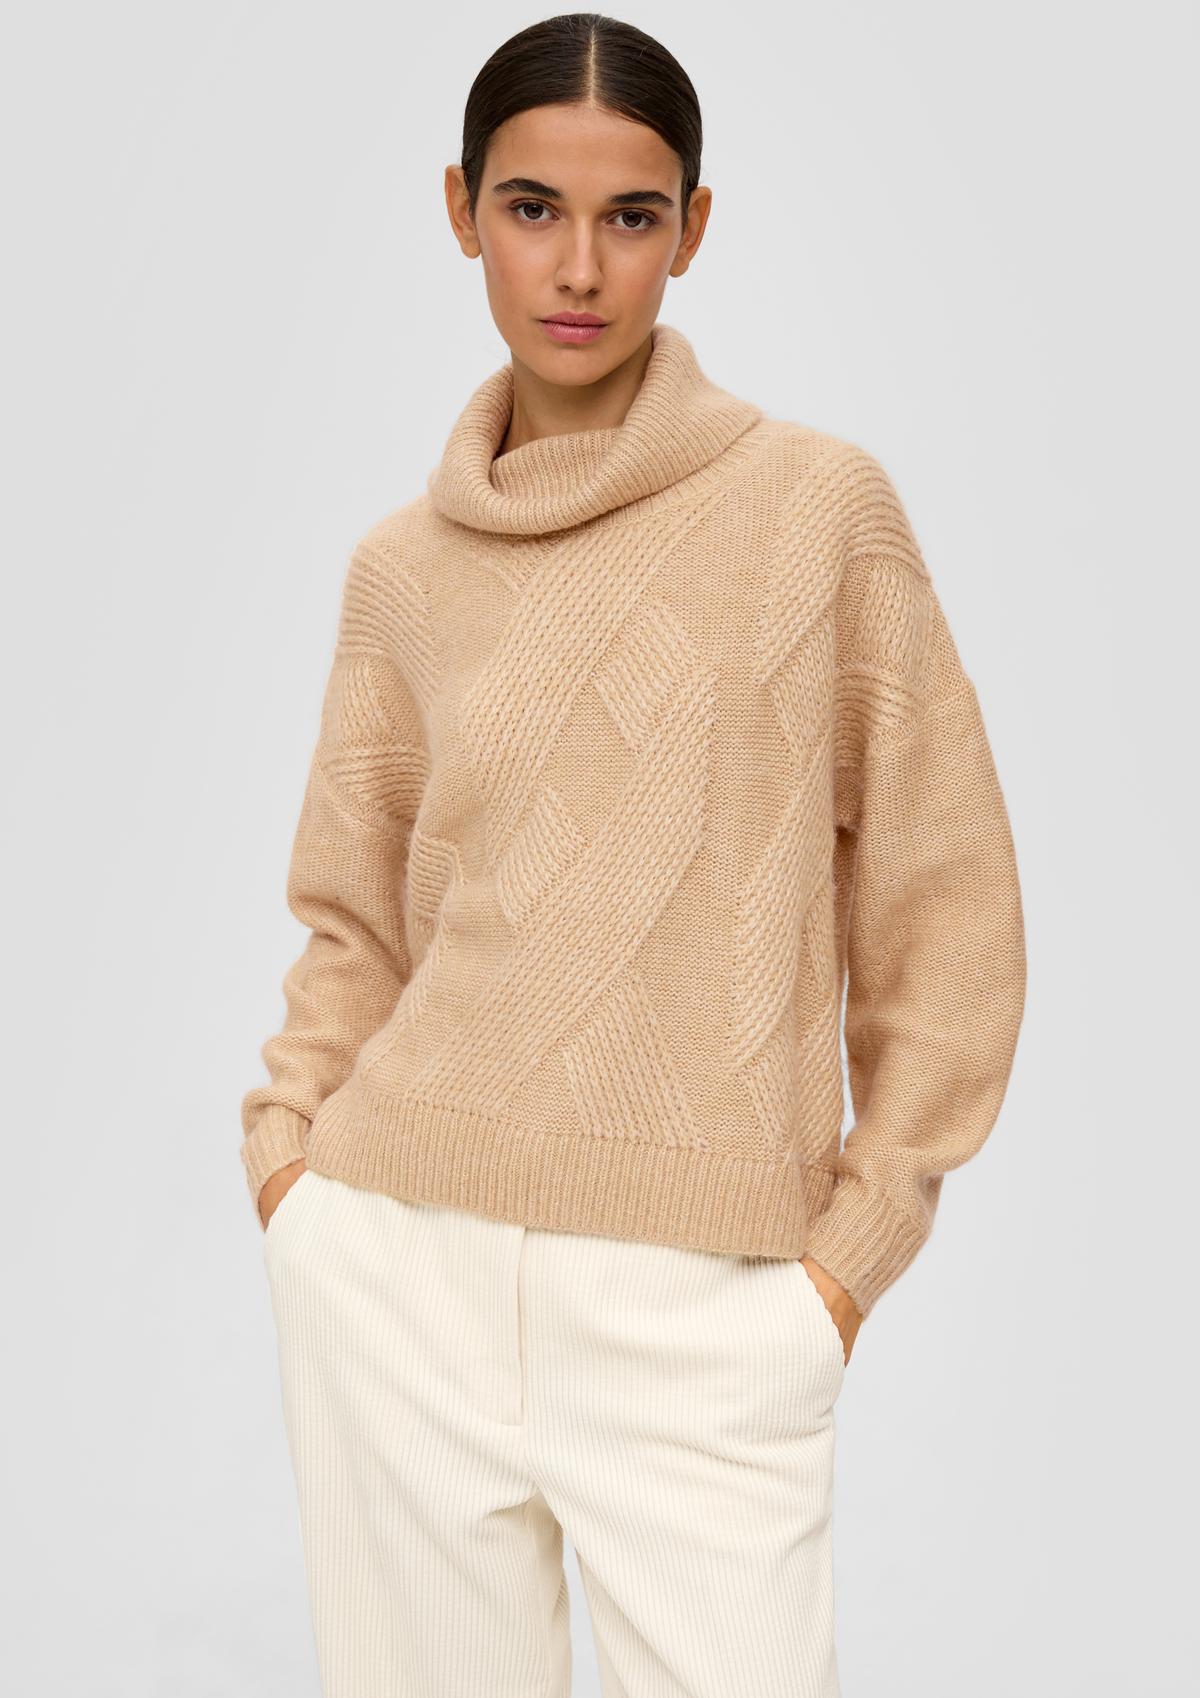 light Polo jumper a brown in - neck blend wool